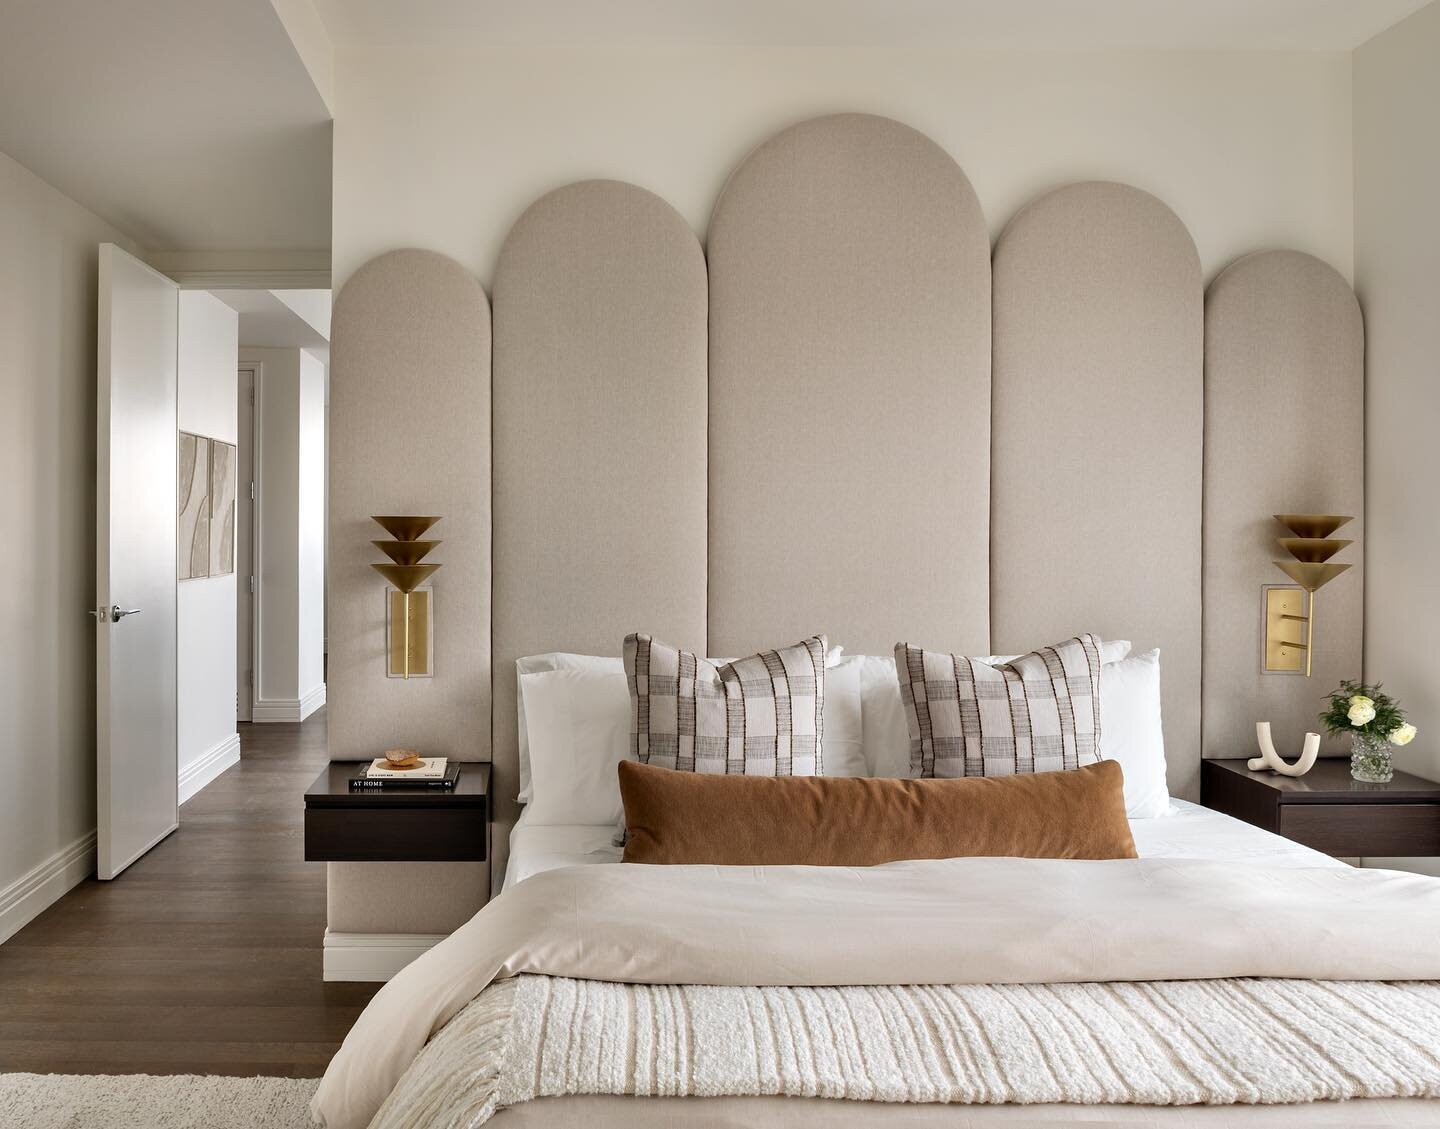 You can find me here on this cold day @suttontower 
Design @amykalikowdesign 
Photo @reganwoodphoto 

#design #nydesigner #apartment #designinspo #bedroom #custombed #interiorinspo #neutrals